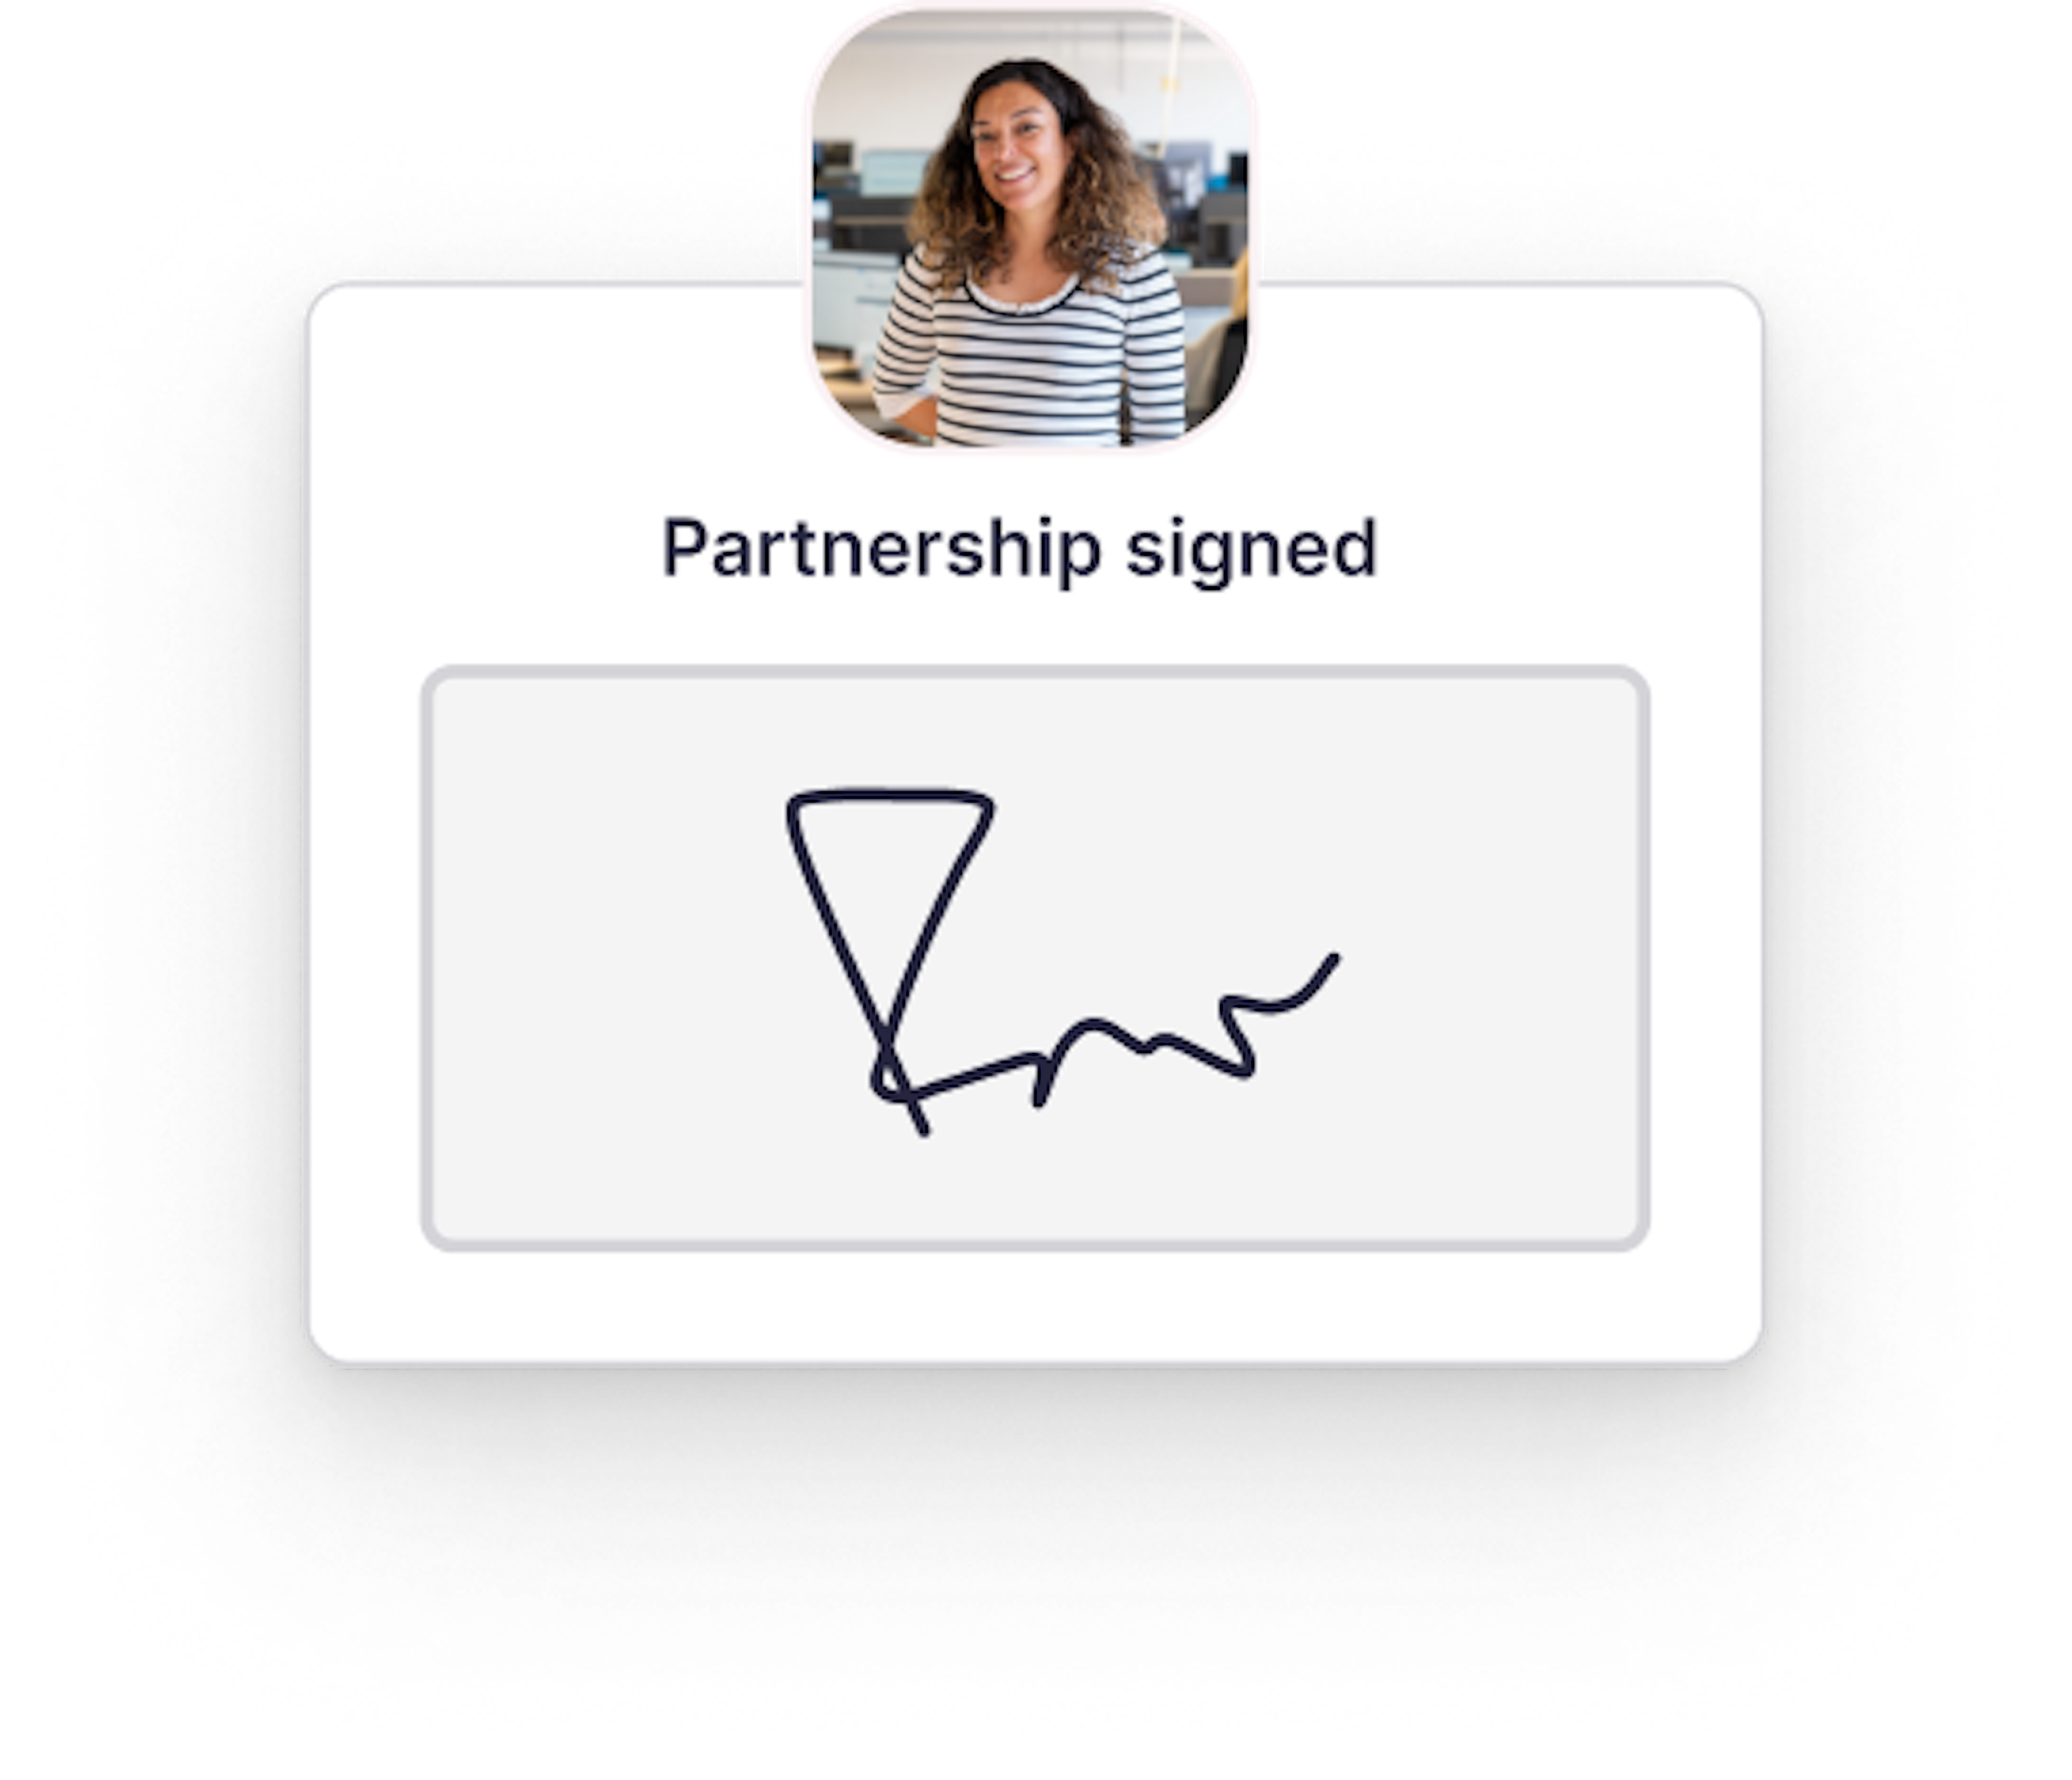 Partners_signed